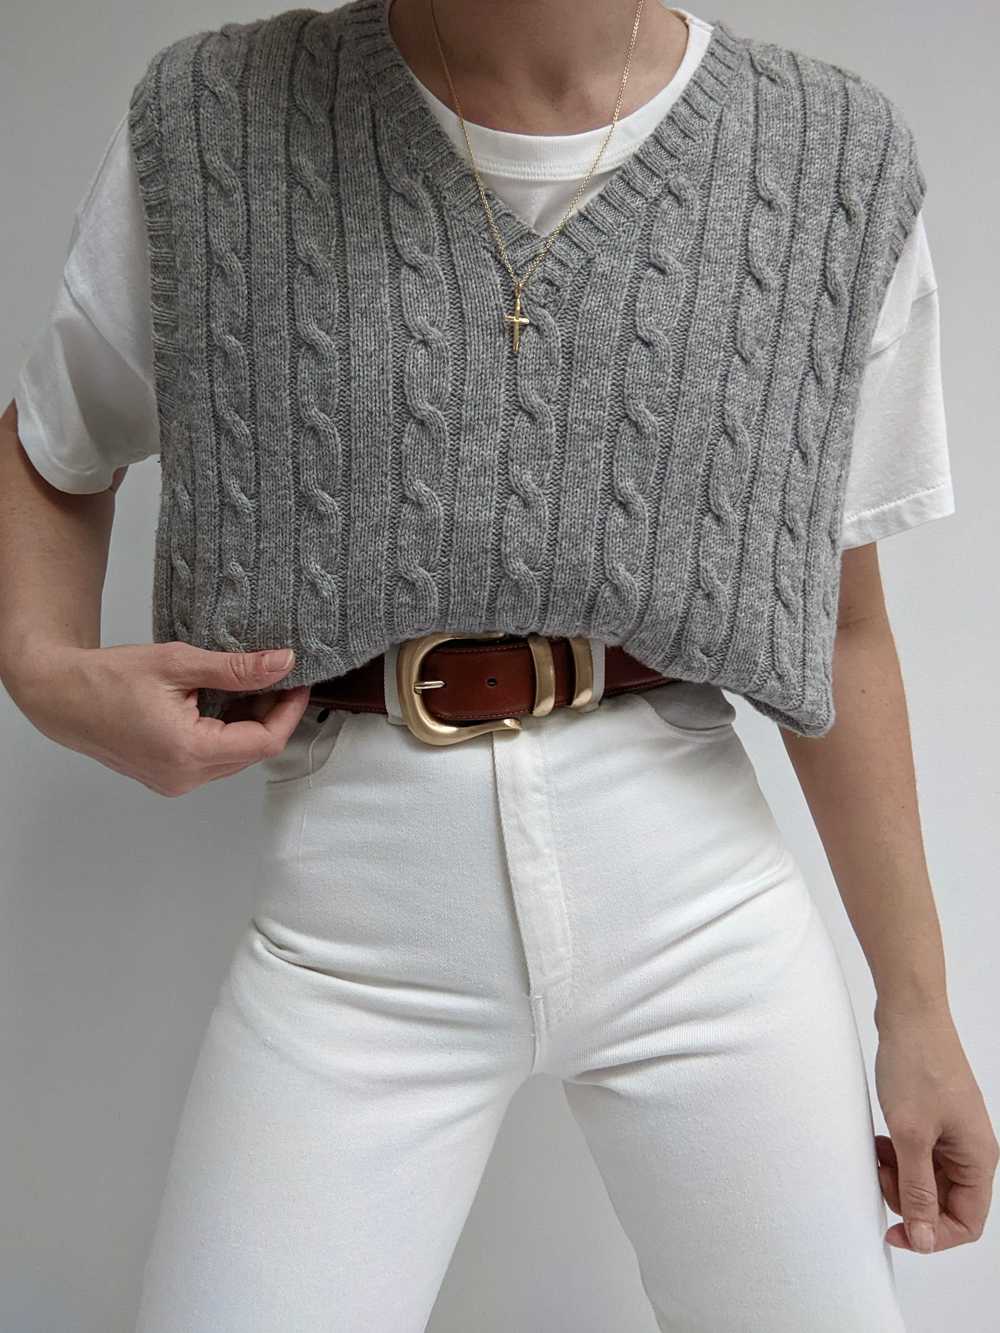 Vintage Grey Cable Knit Lambswool Sweater Vest - image 1